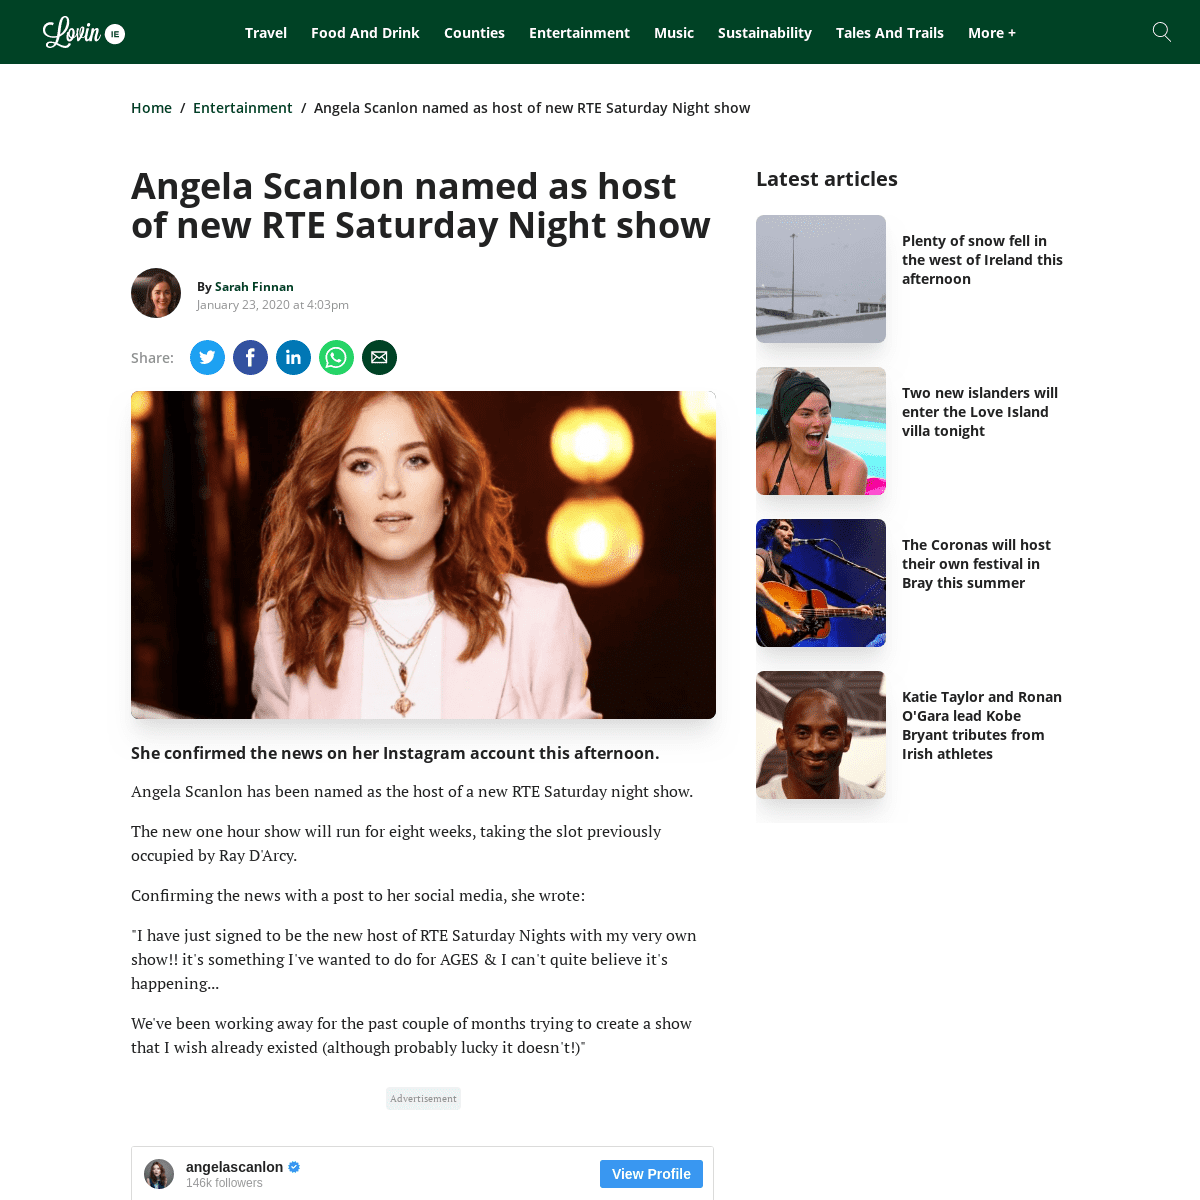 A complete backup of lovin.ie/entertainment/angela-scanlon-named-as-host-of-new-rte-saturday-night-show